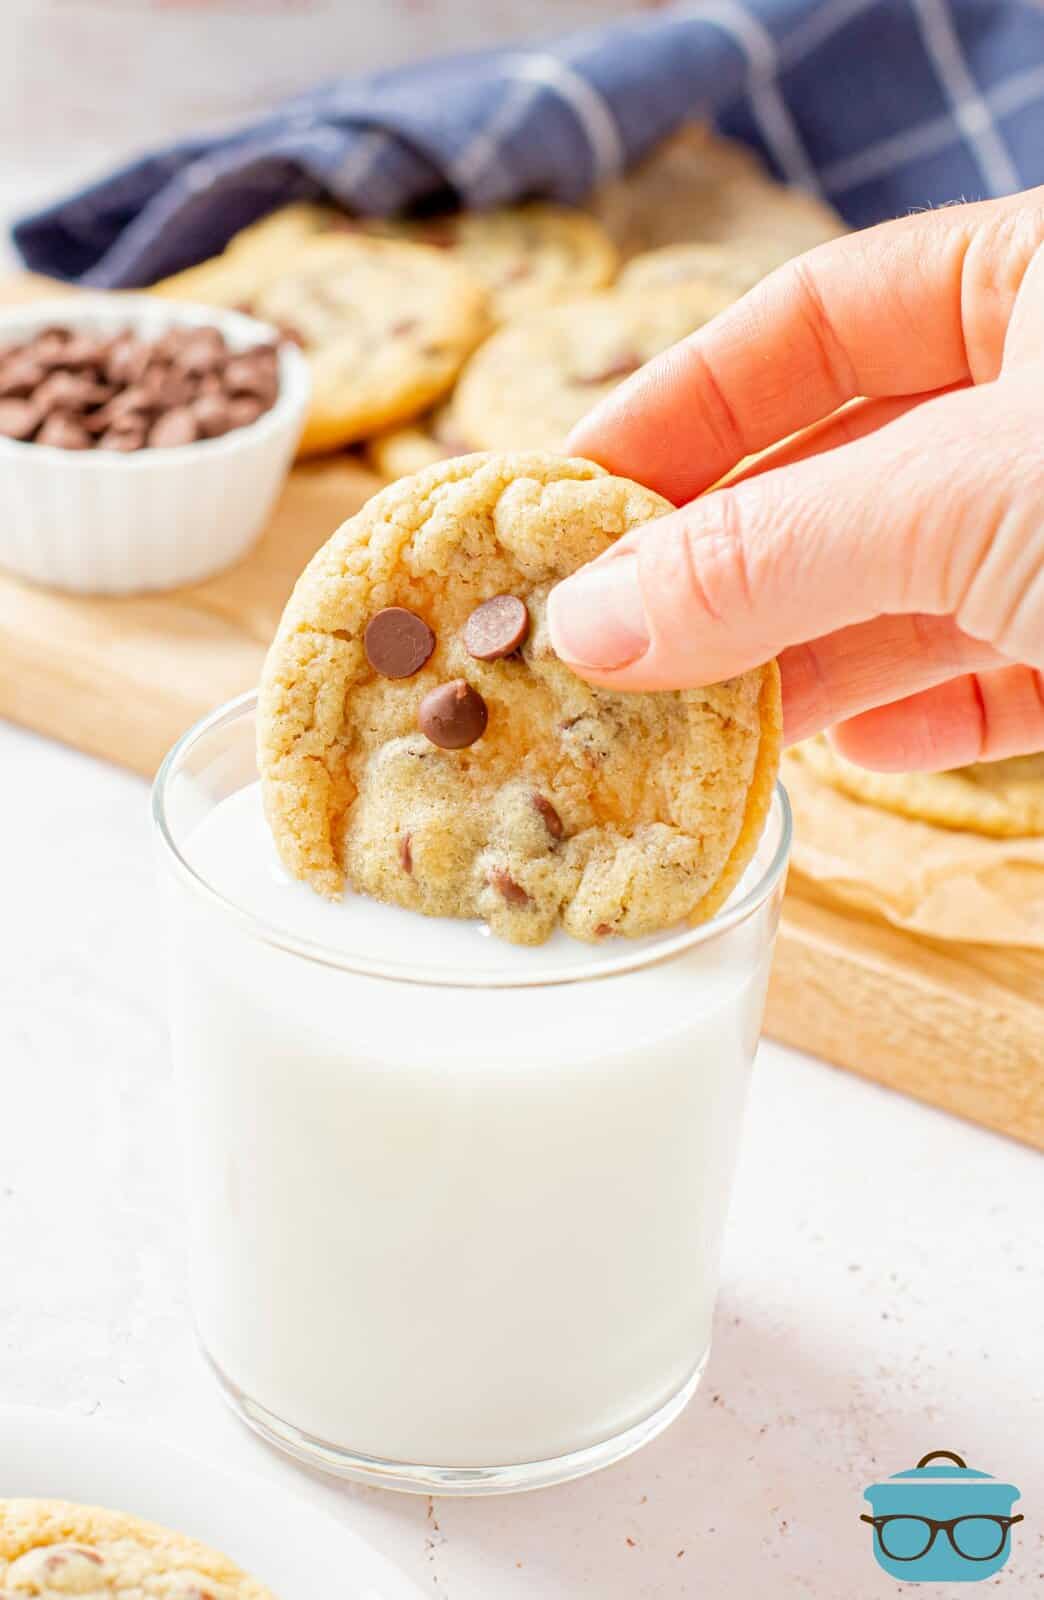 Hand dipping one Chewy Chocolate Chip Cookie into milk.